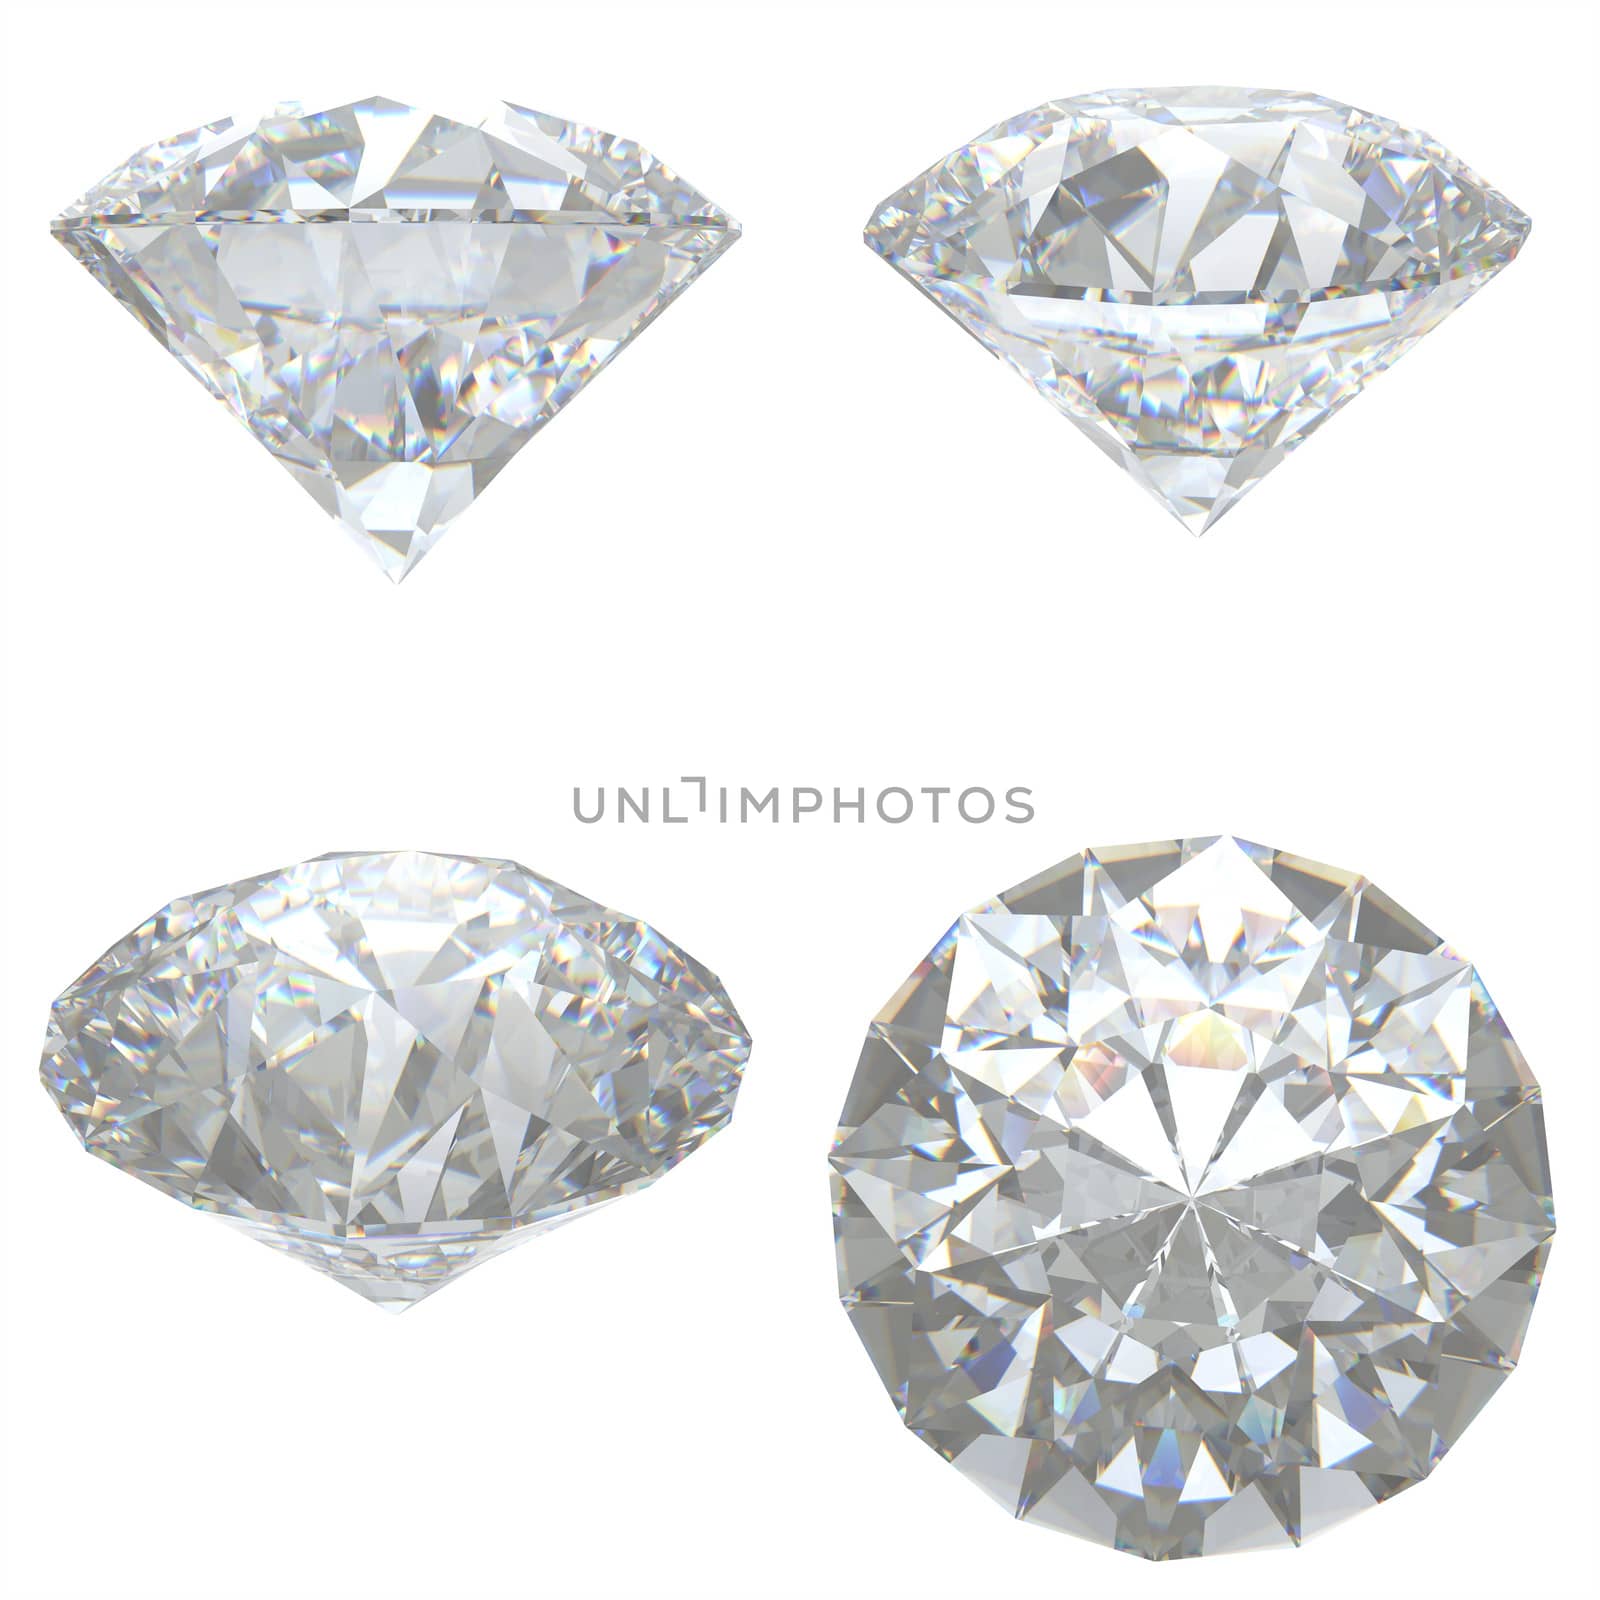 4 Diamonds set on white background - clipping path by 123dartist